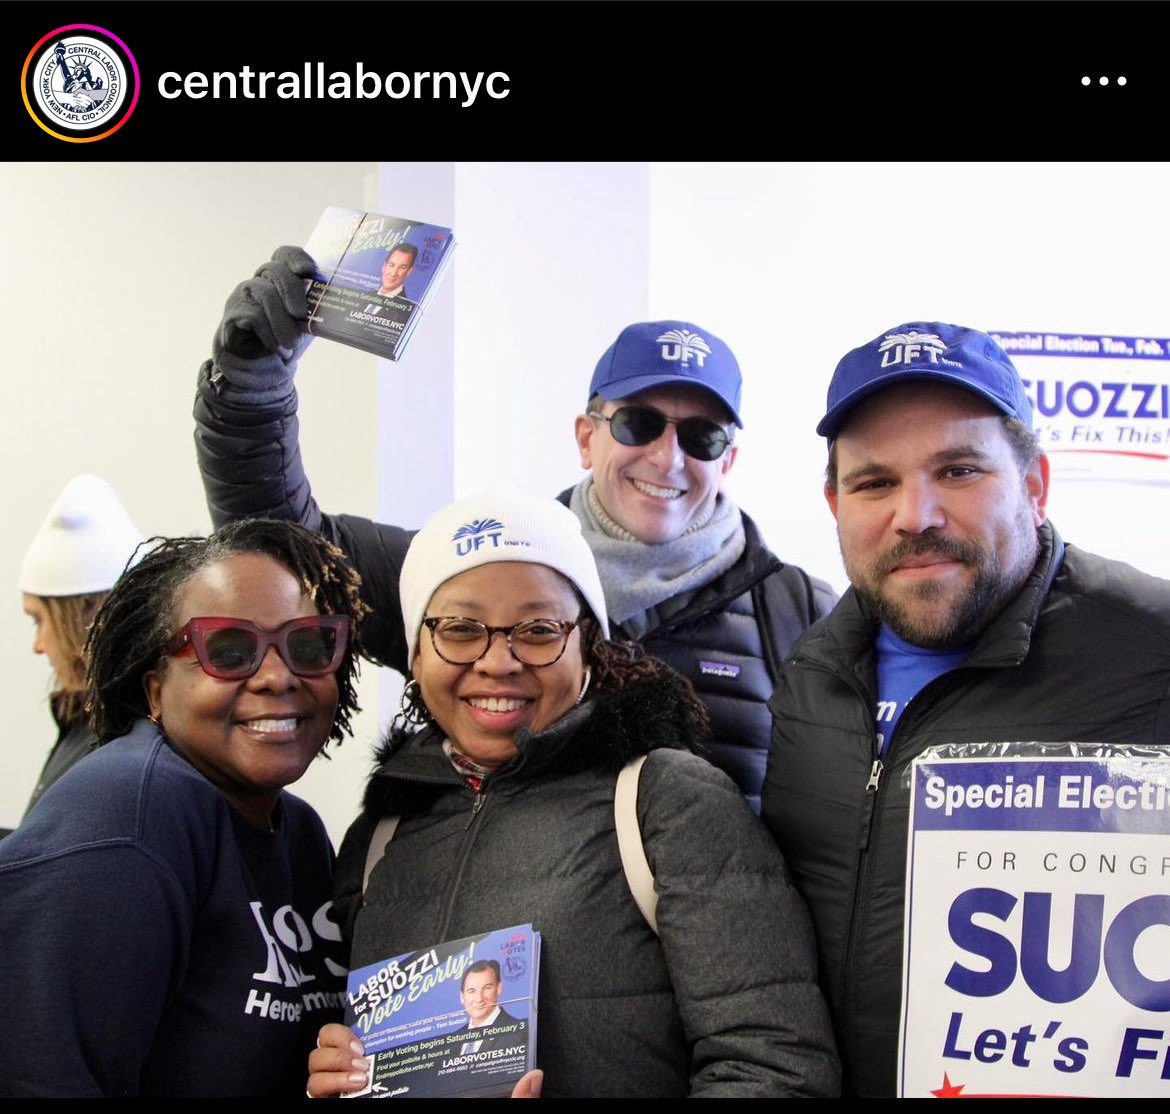 A Saturday of Labor with @CentralLaborNYC!! Today, @UFT members canvassed through District 25 in support of @Tom_Suozzi run for NY’s 3rd Congressional Seat. Early voting starts today!! Tomorrow, we’re at it again! The work doesn’t stop. See you tomorrow 💪🏾✊🏾